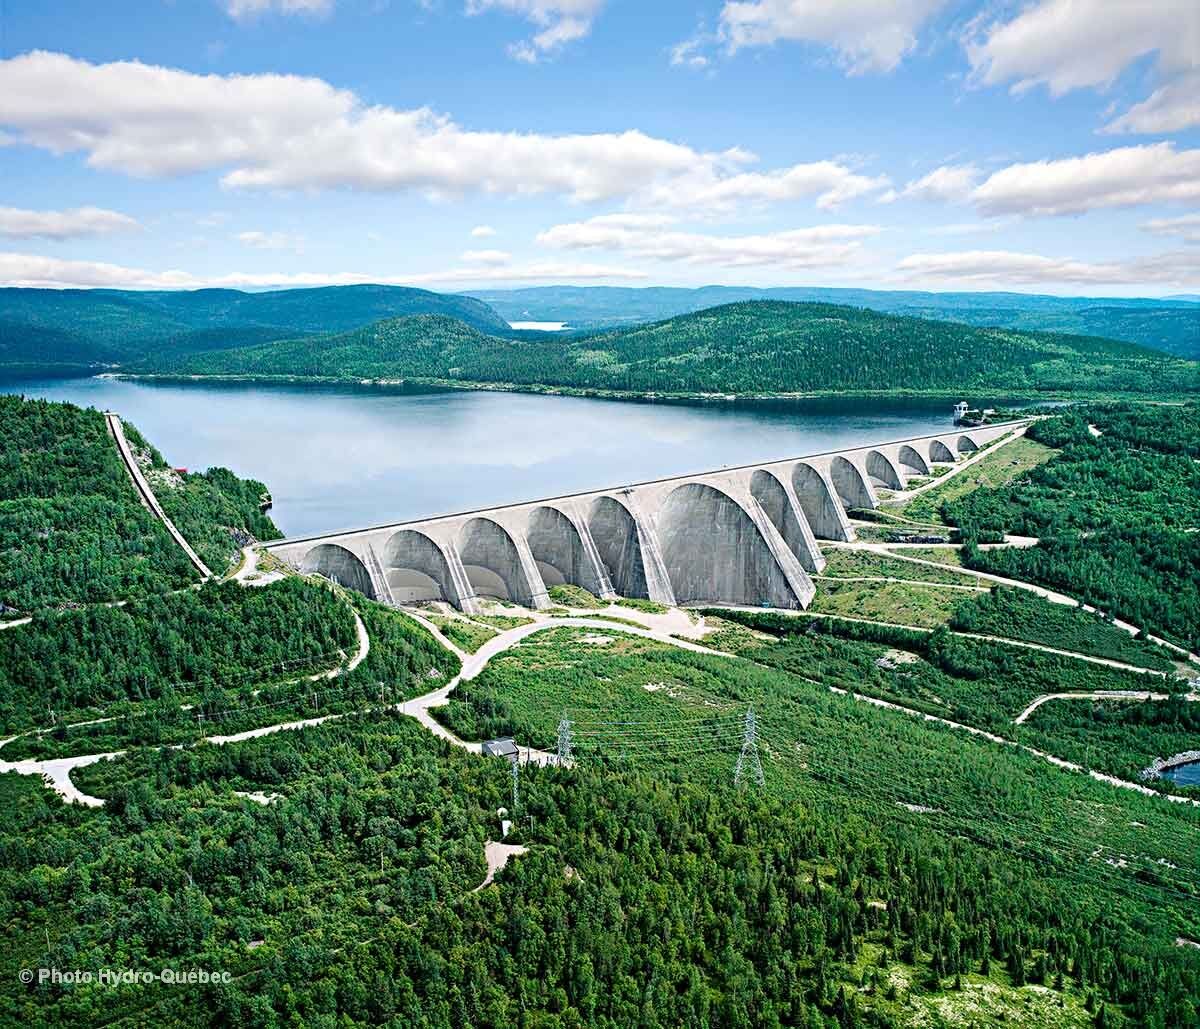 Big Power Shortfall Looms After Quebec Wooed US With Cheap Hydro